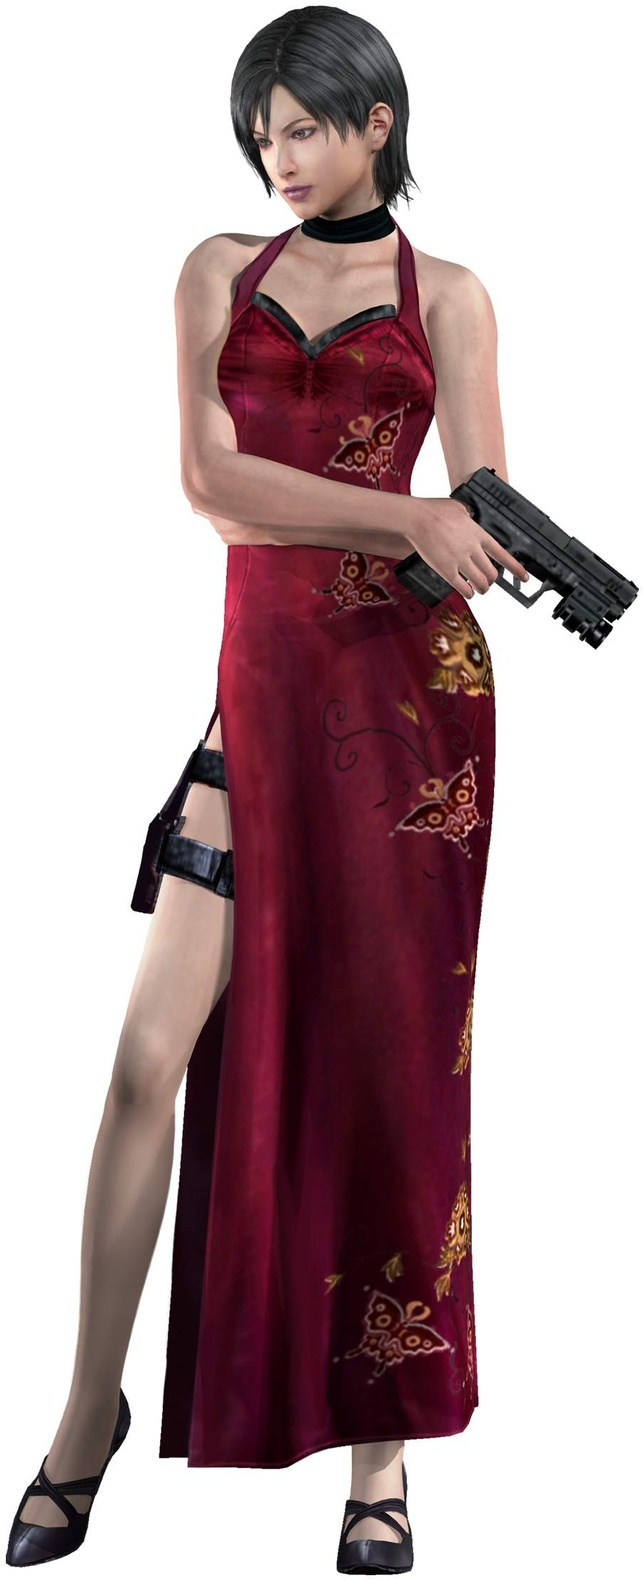 Resident Evil 4 Remake Datamine Points to Possible Ada Separate